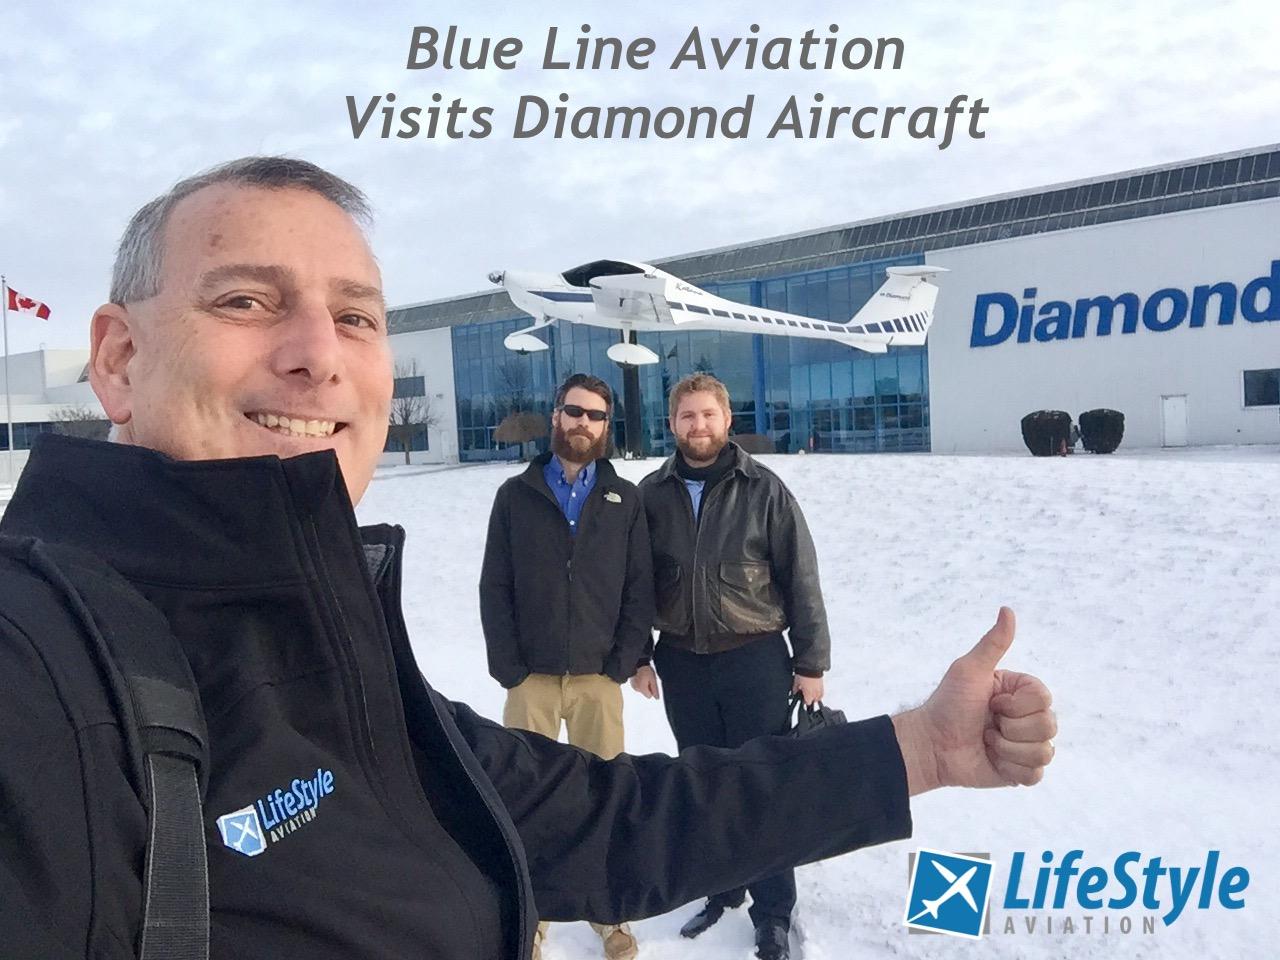 Visiting Diamond Aircraft with Blue Line Aviation